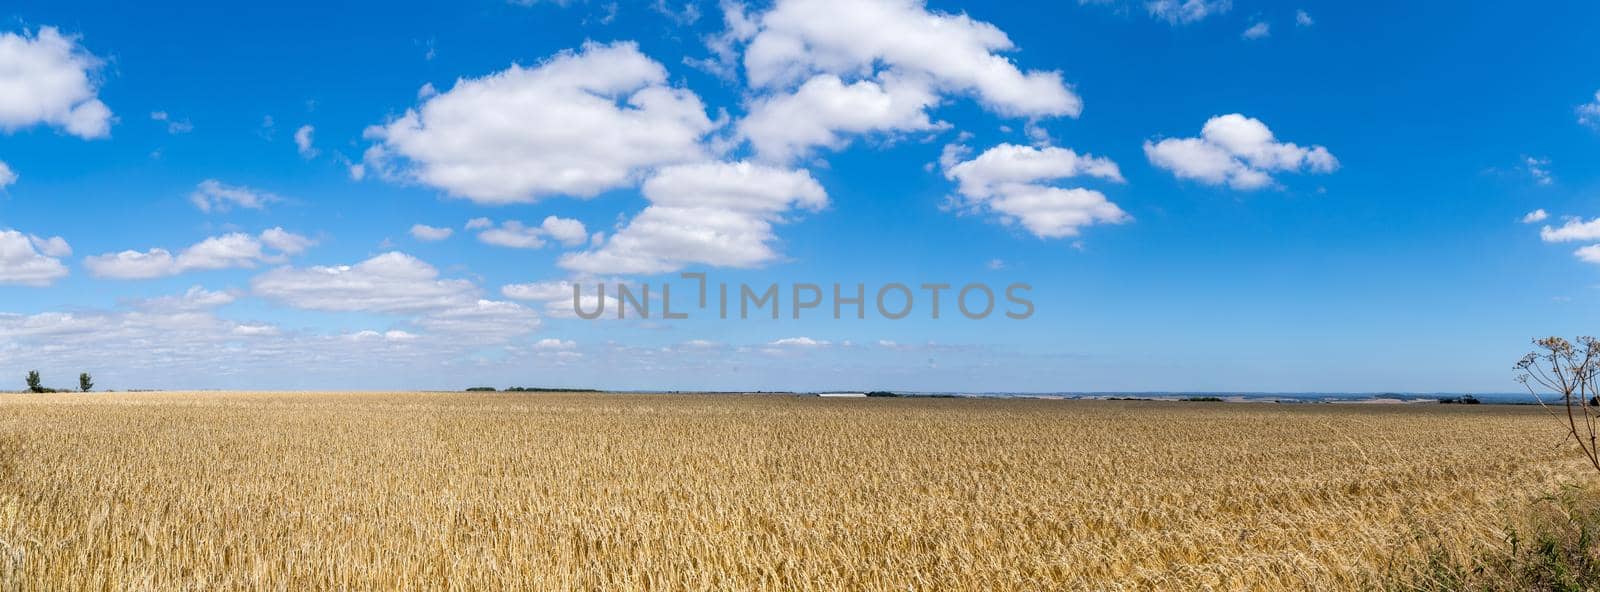 Field of barley in a summer day. during harvesting period, a panoramic view of the crops with a ray of sunshine by LeoniekvanderVliet